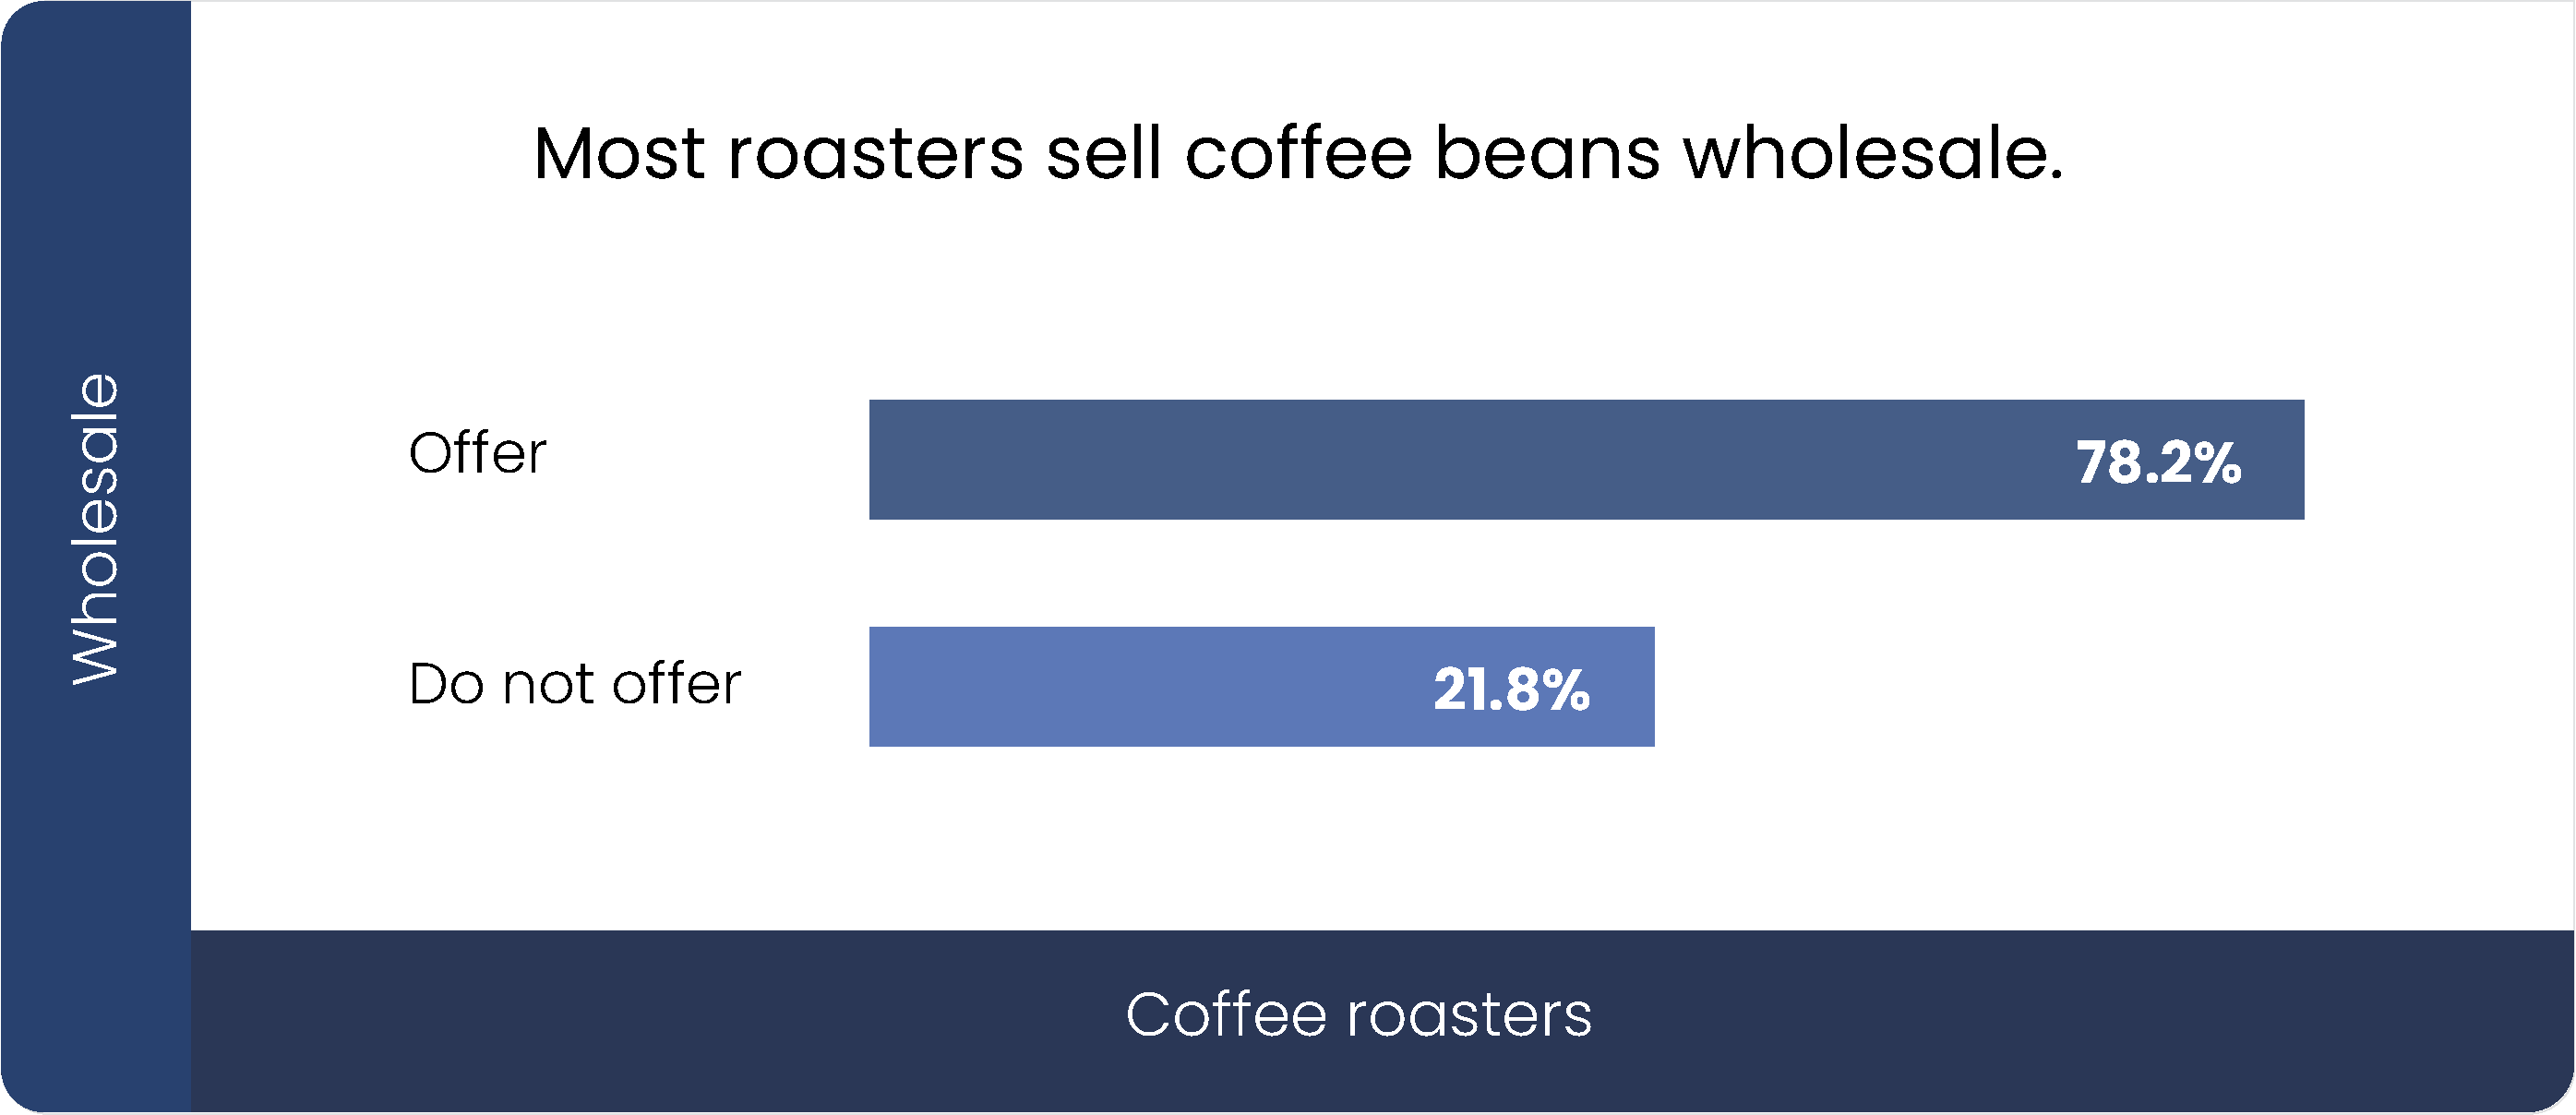 Most roasters sell coffee beans wholesale